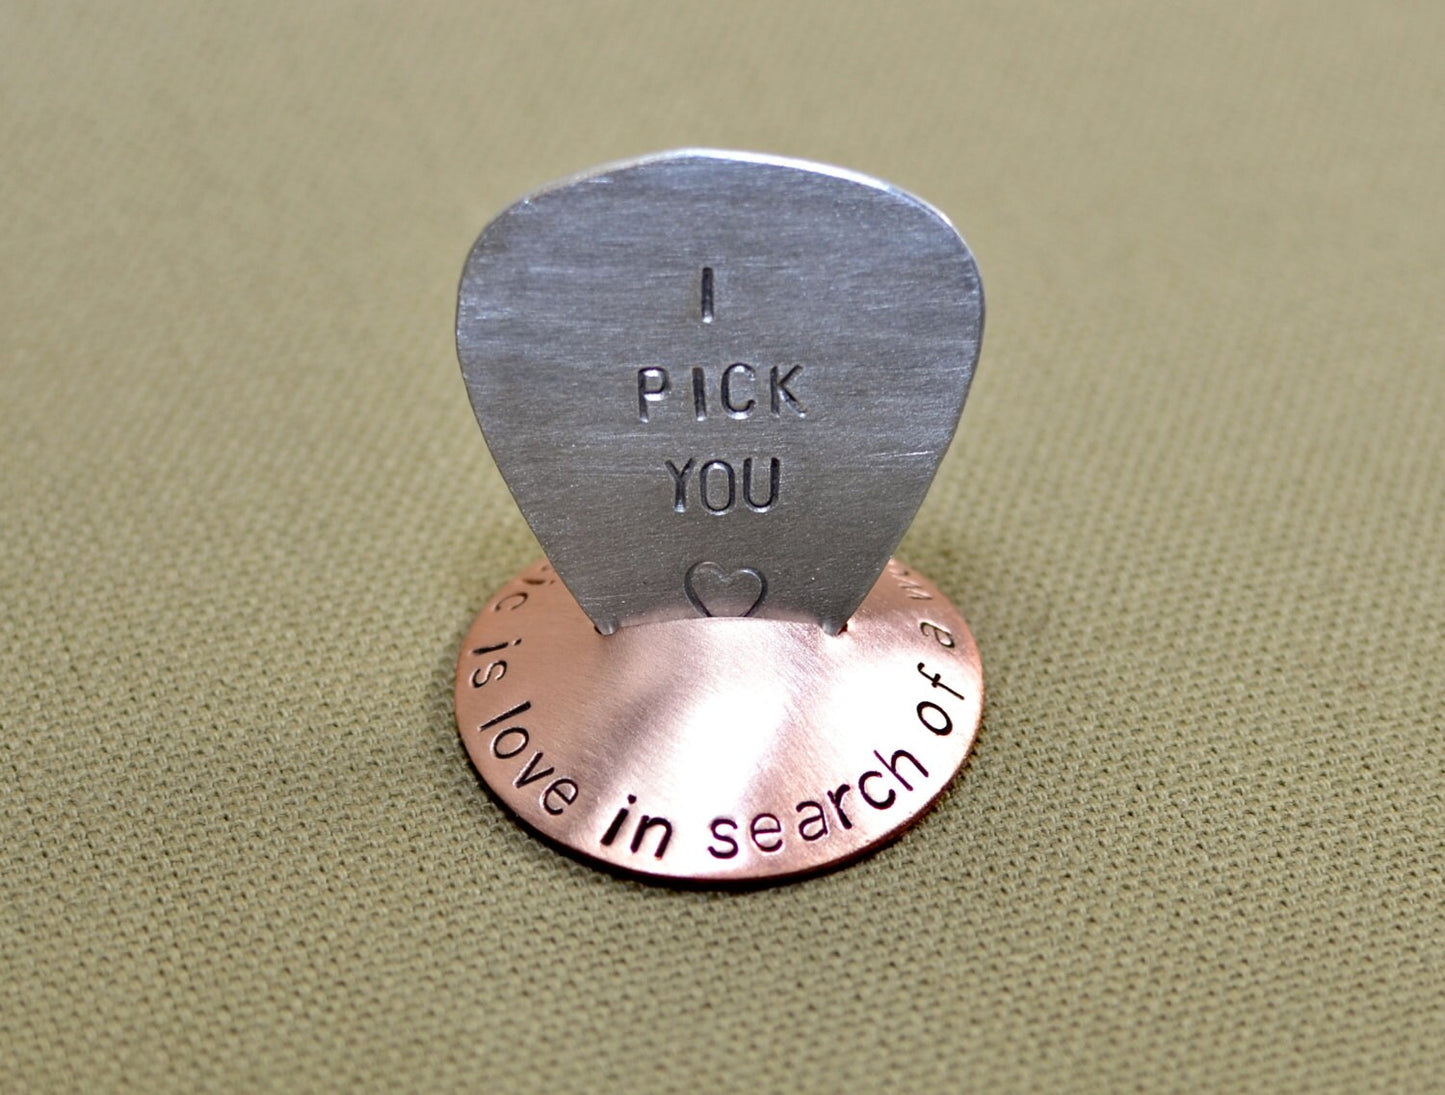 Copper guitar pick stand with "music is love in search of a word